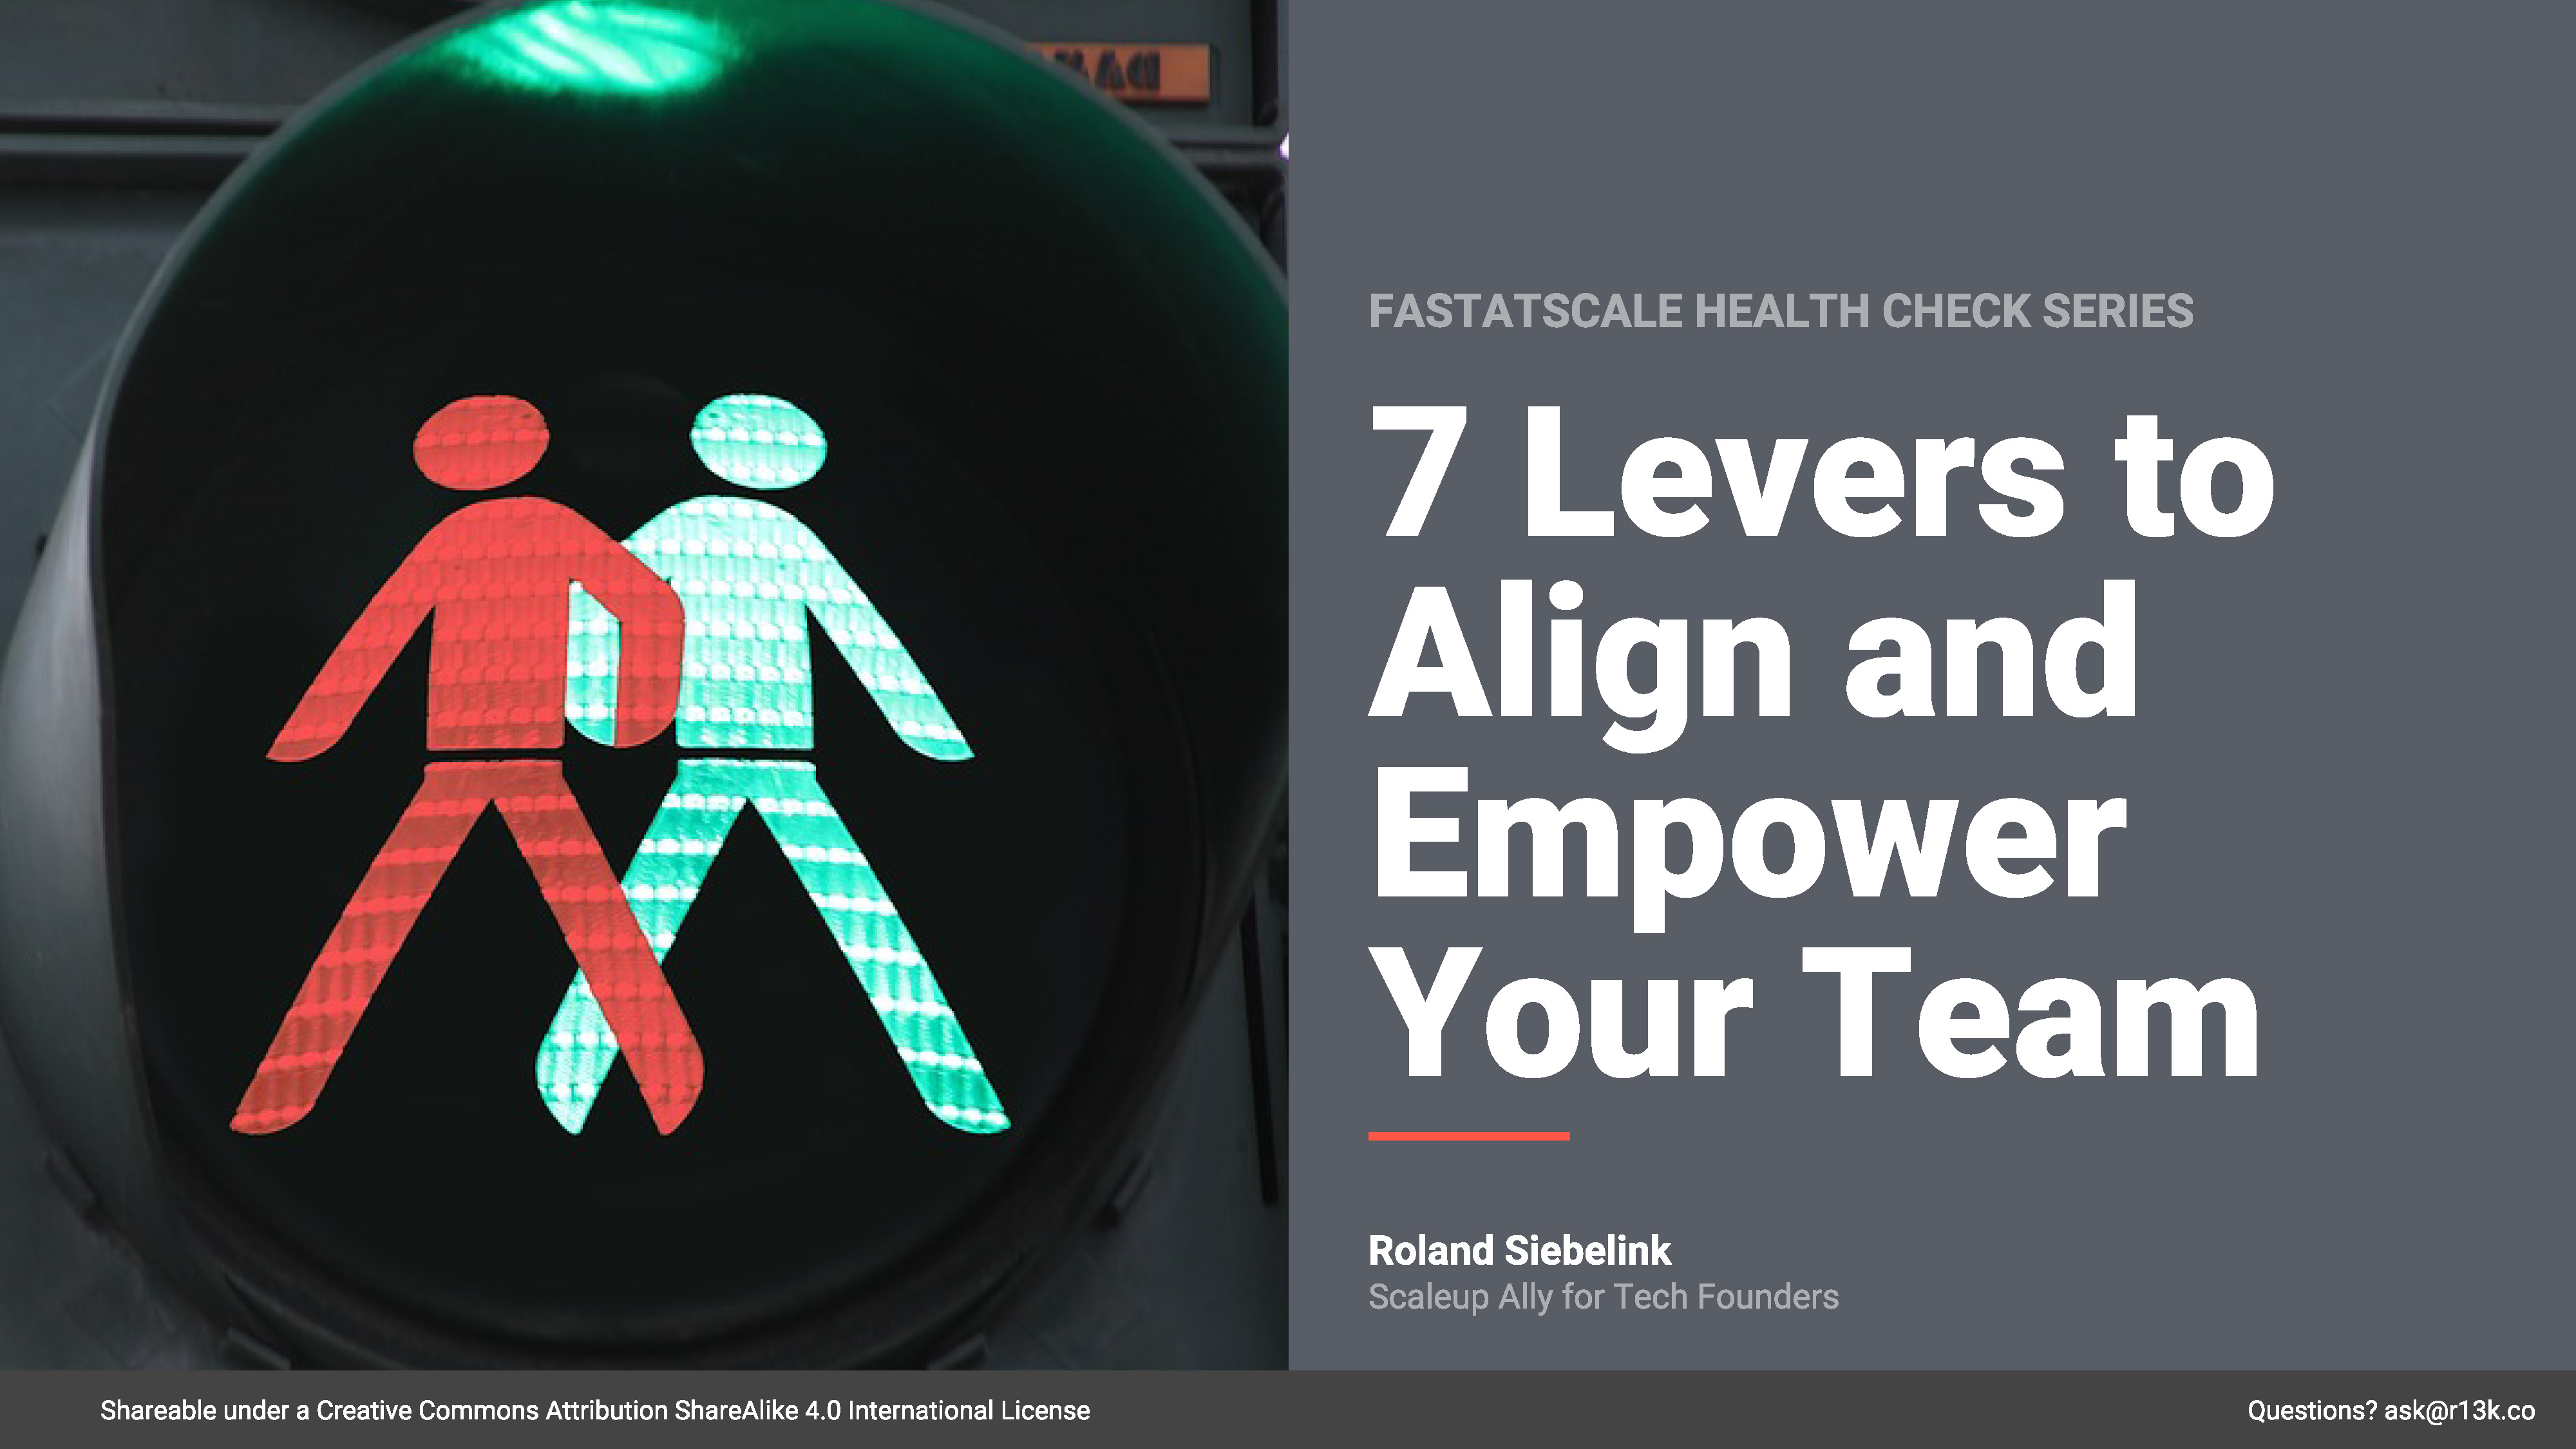 7 Levers to Align and Empower Your Team 